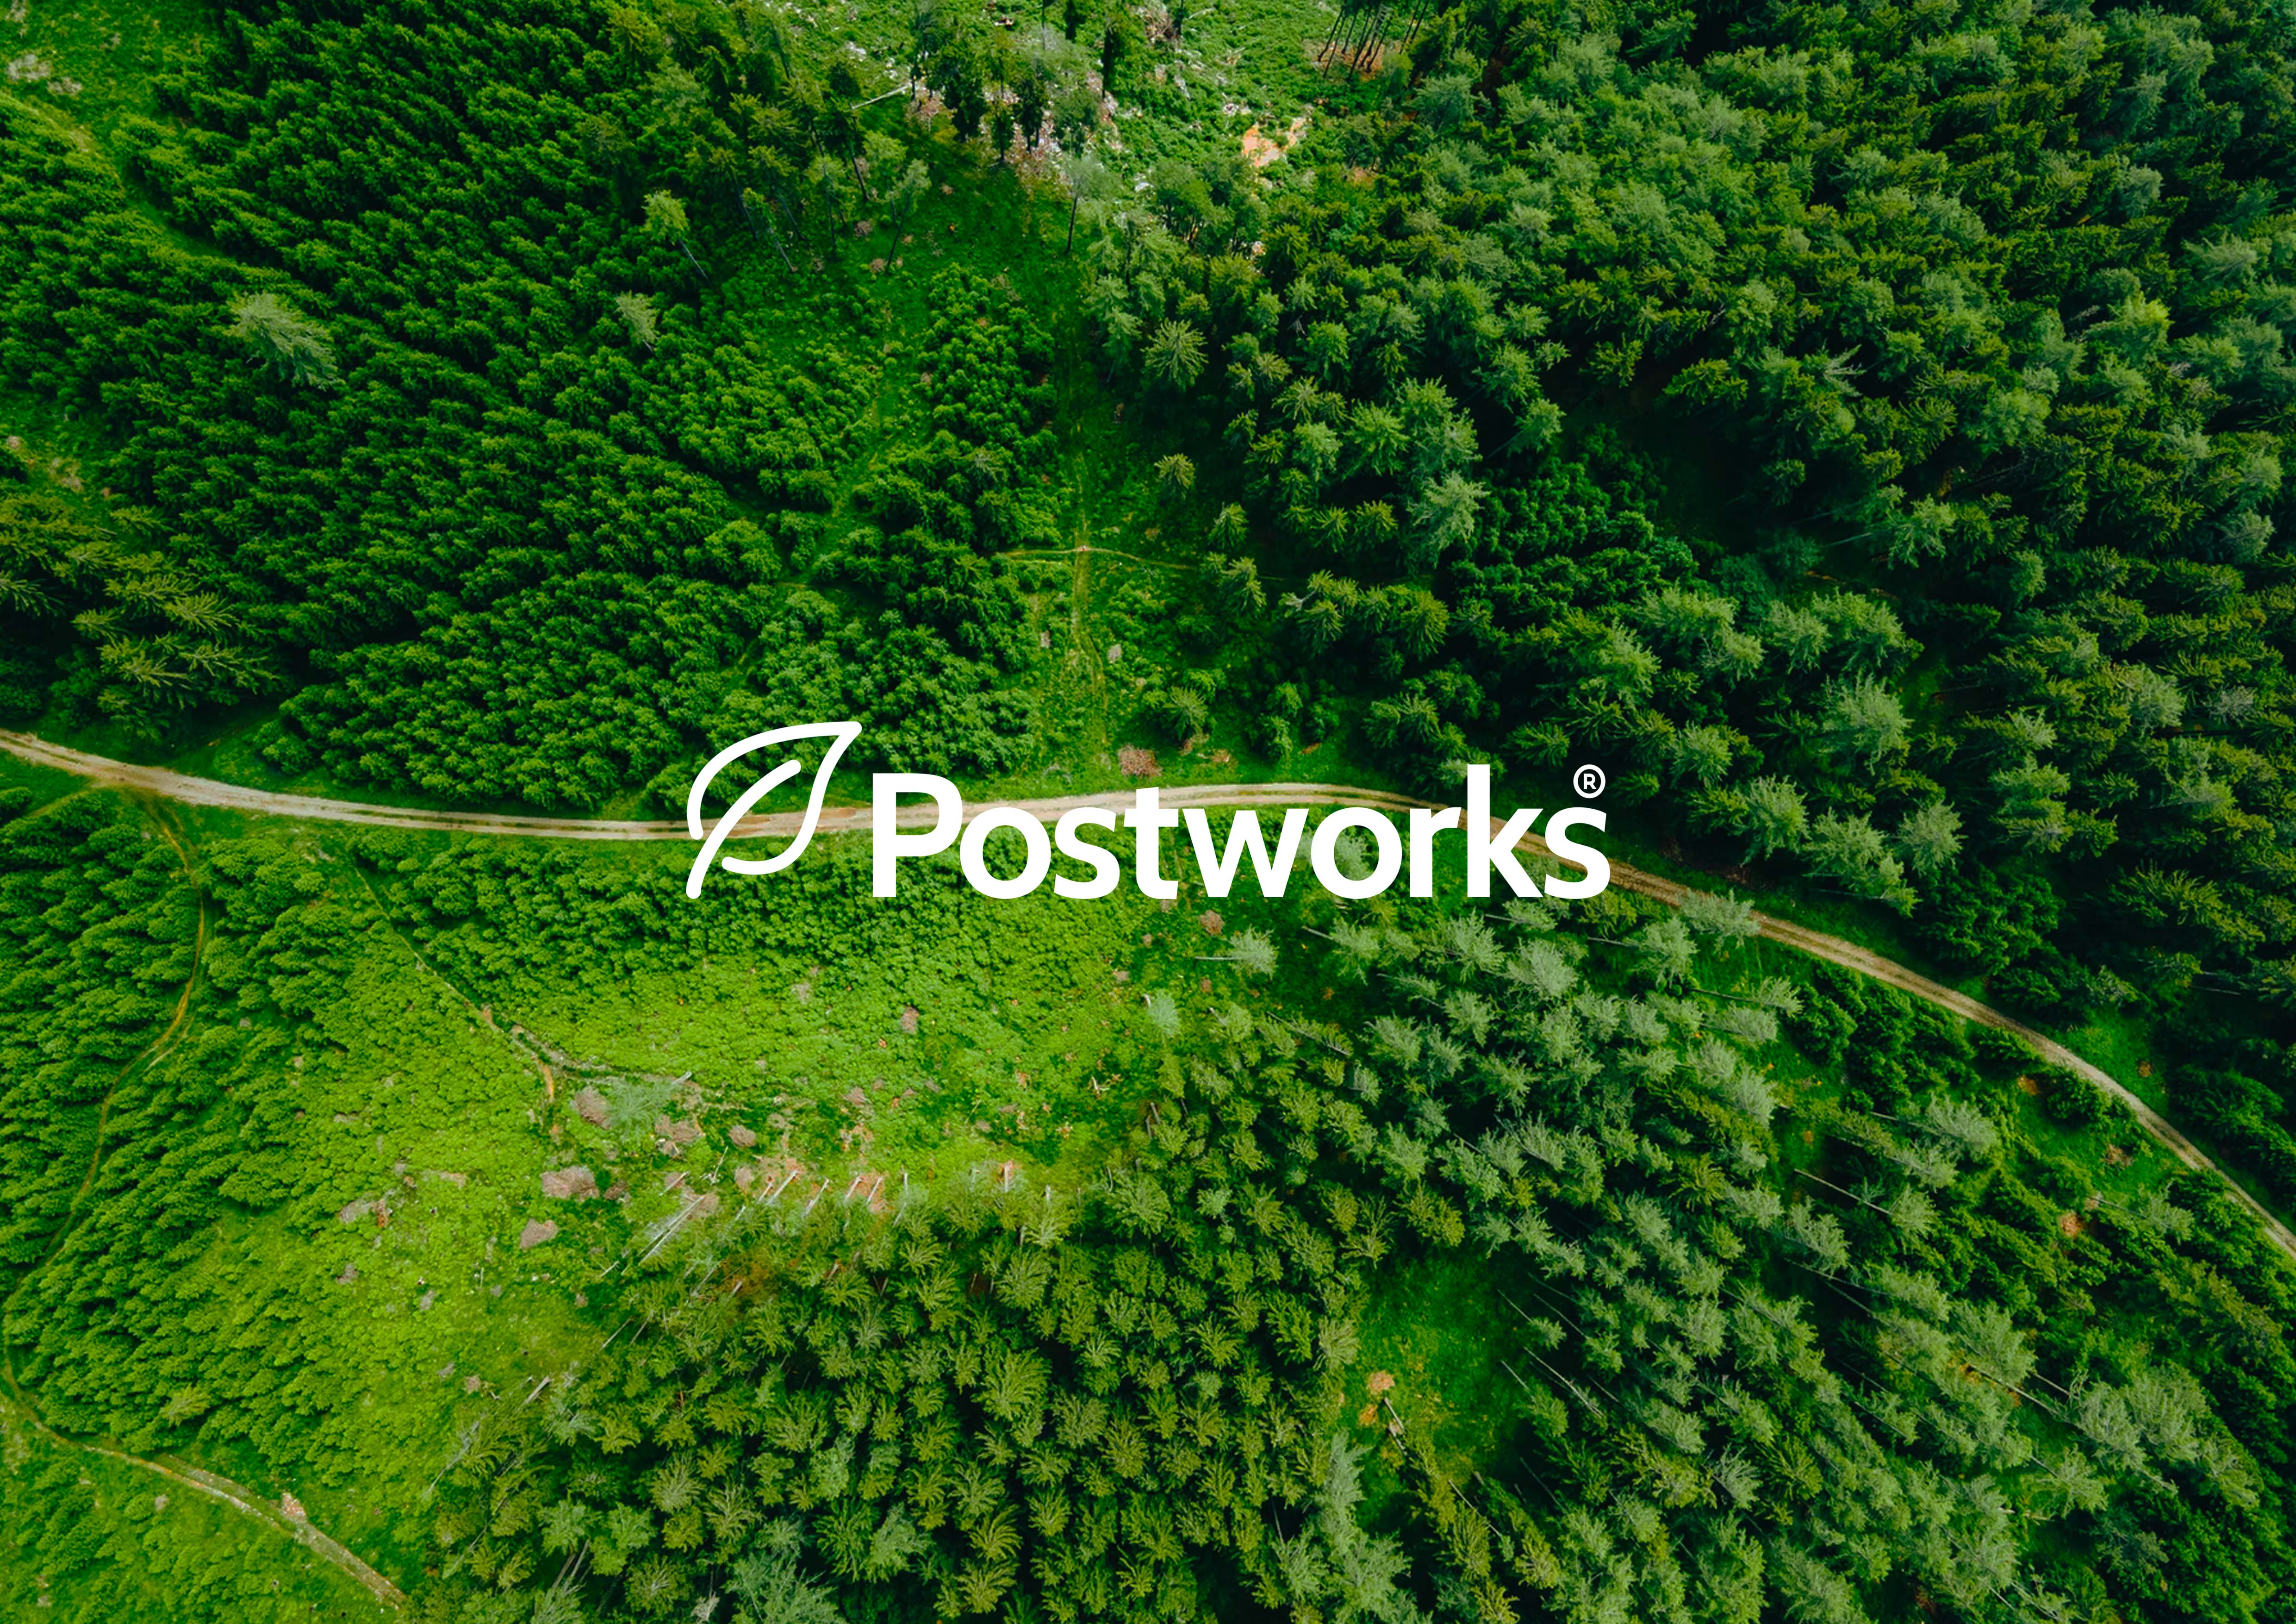 Postworks is the first online postal company to be carbon neutral